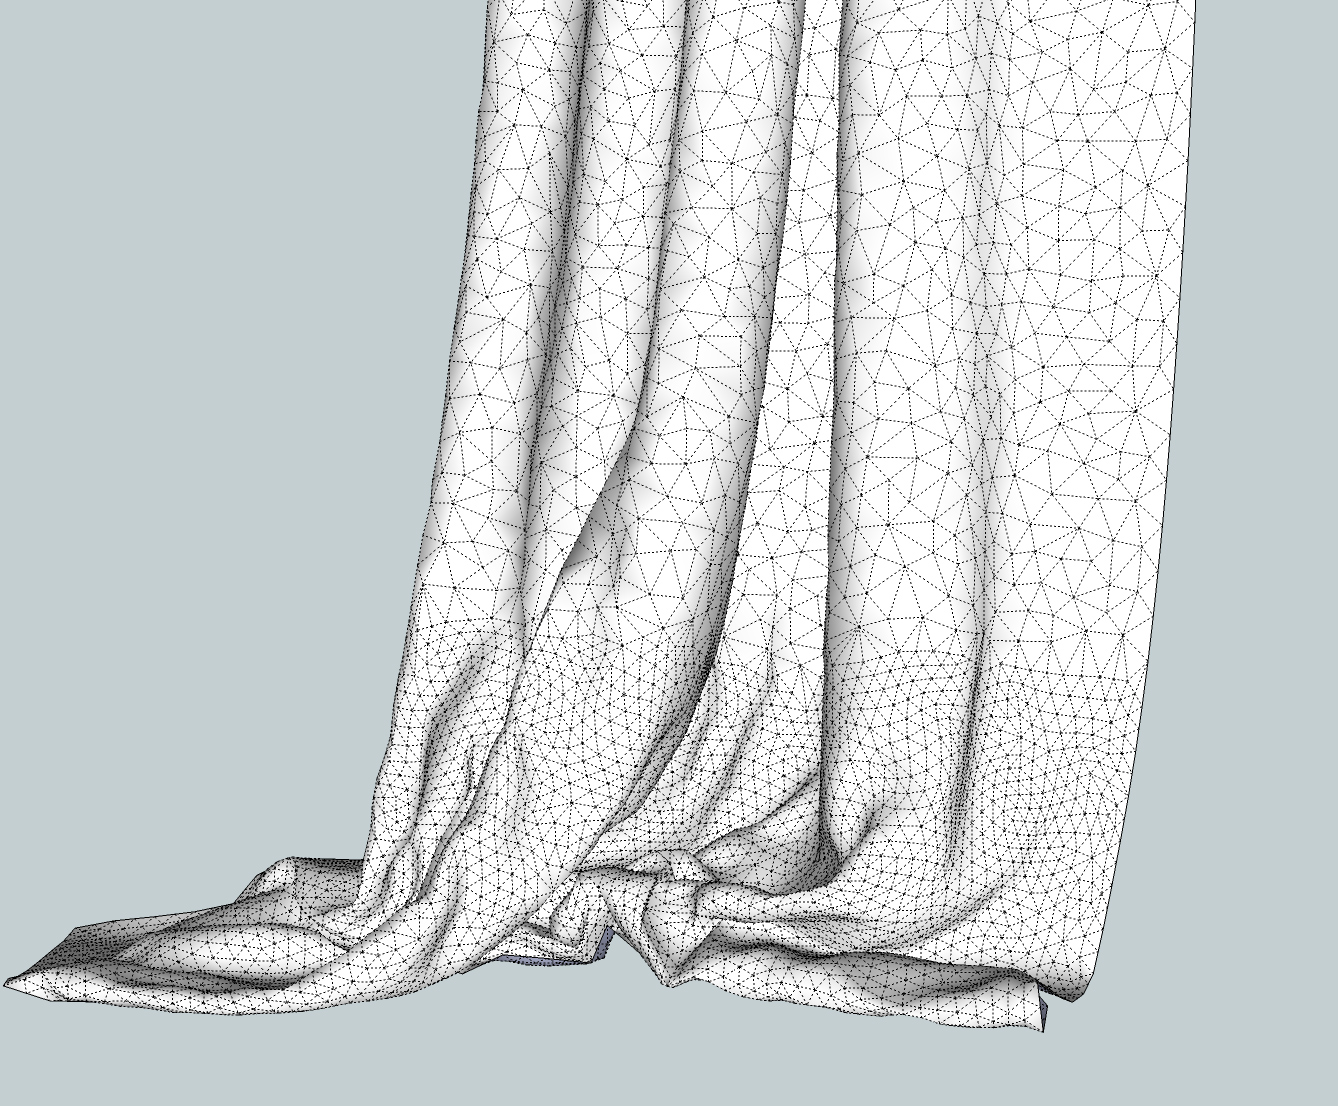 CURTAINS 2 SKETCHUP FREE 3D MODEL